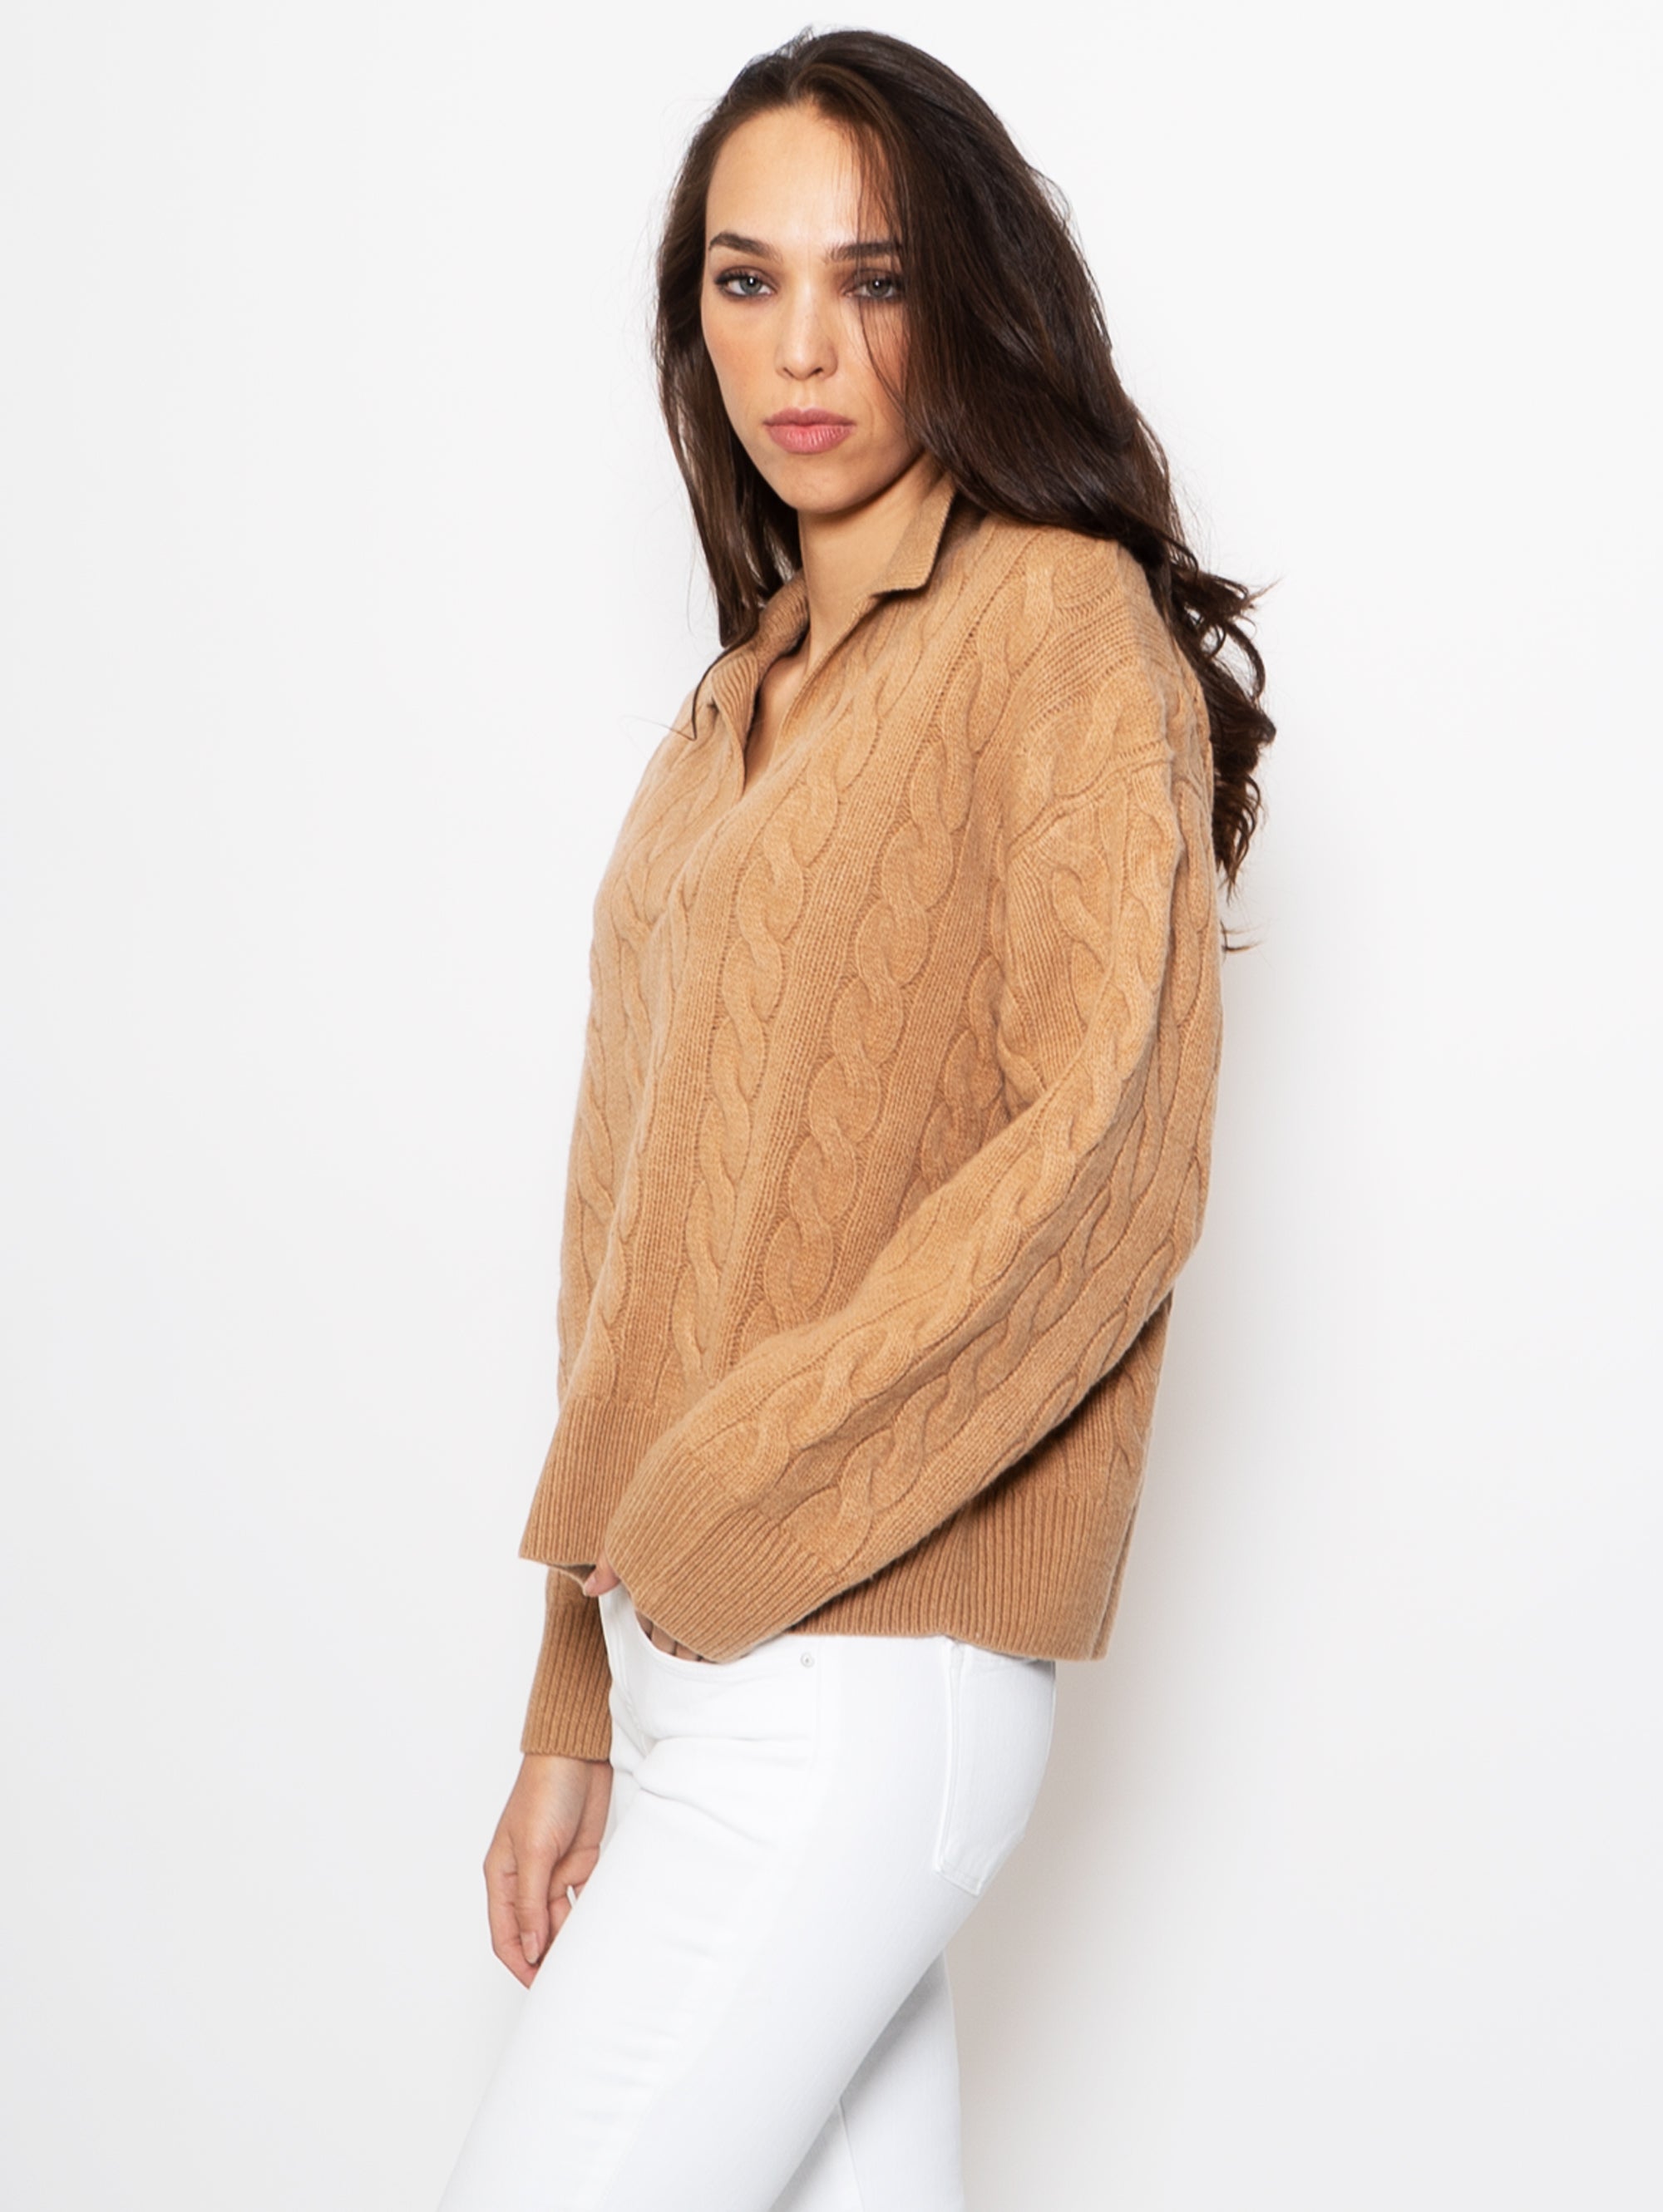 Braided Sweater with Camel Polo Neck